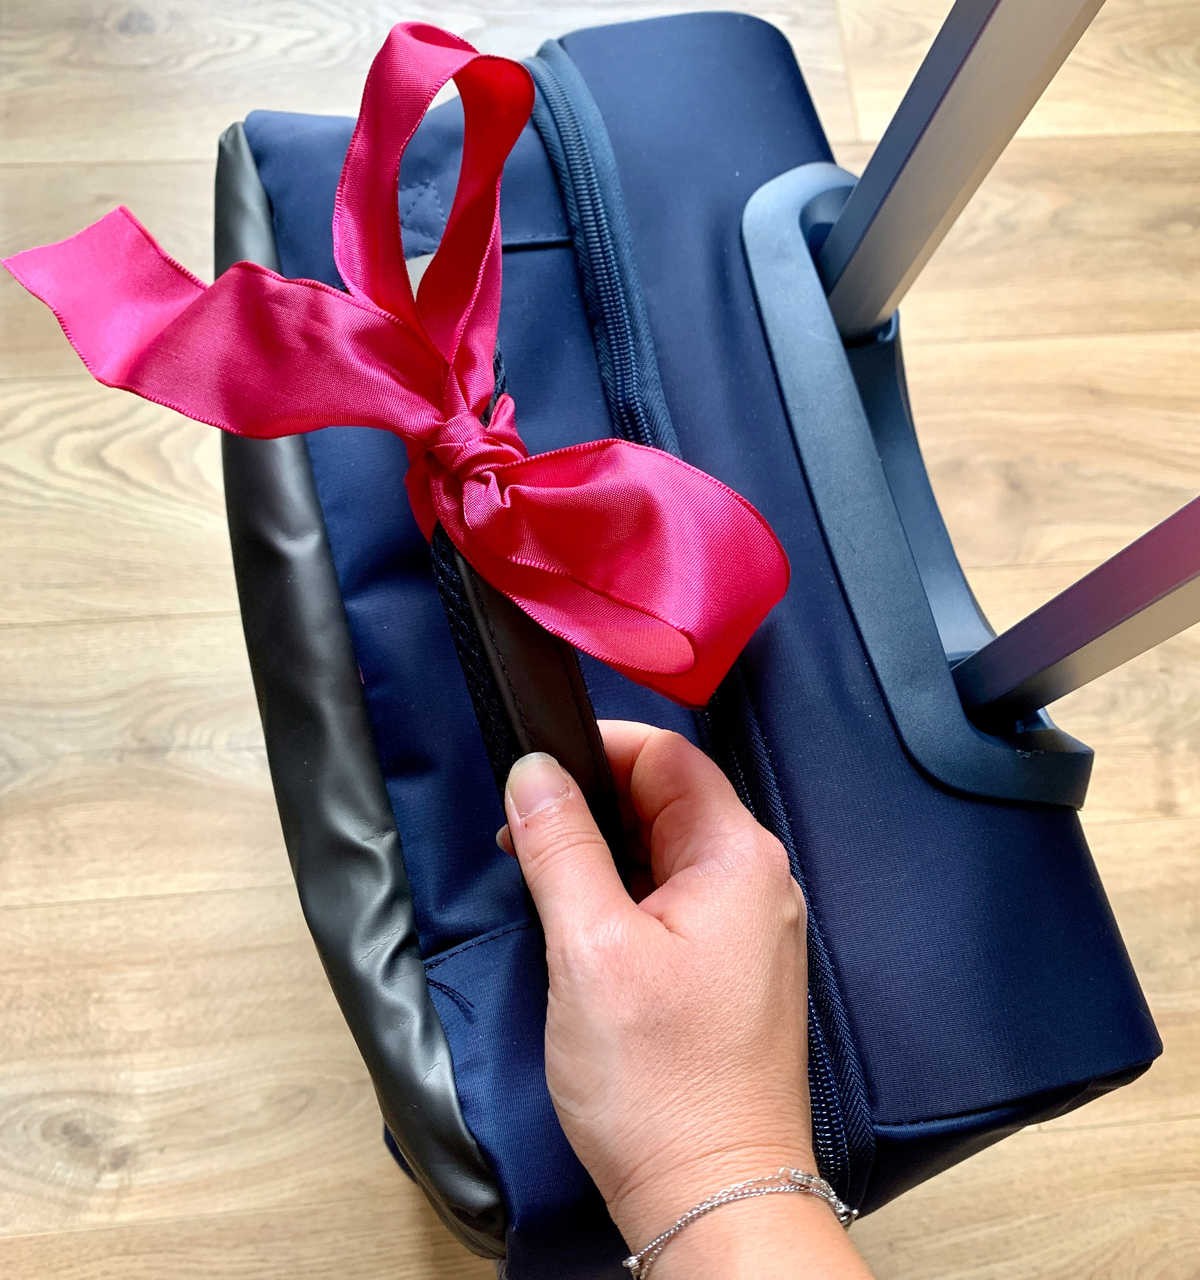 Tie a Colored Bow on Your Suitcase to Distinguish It